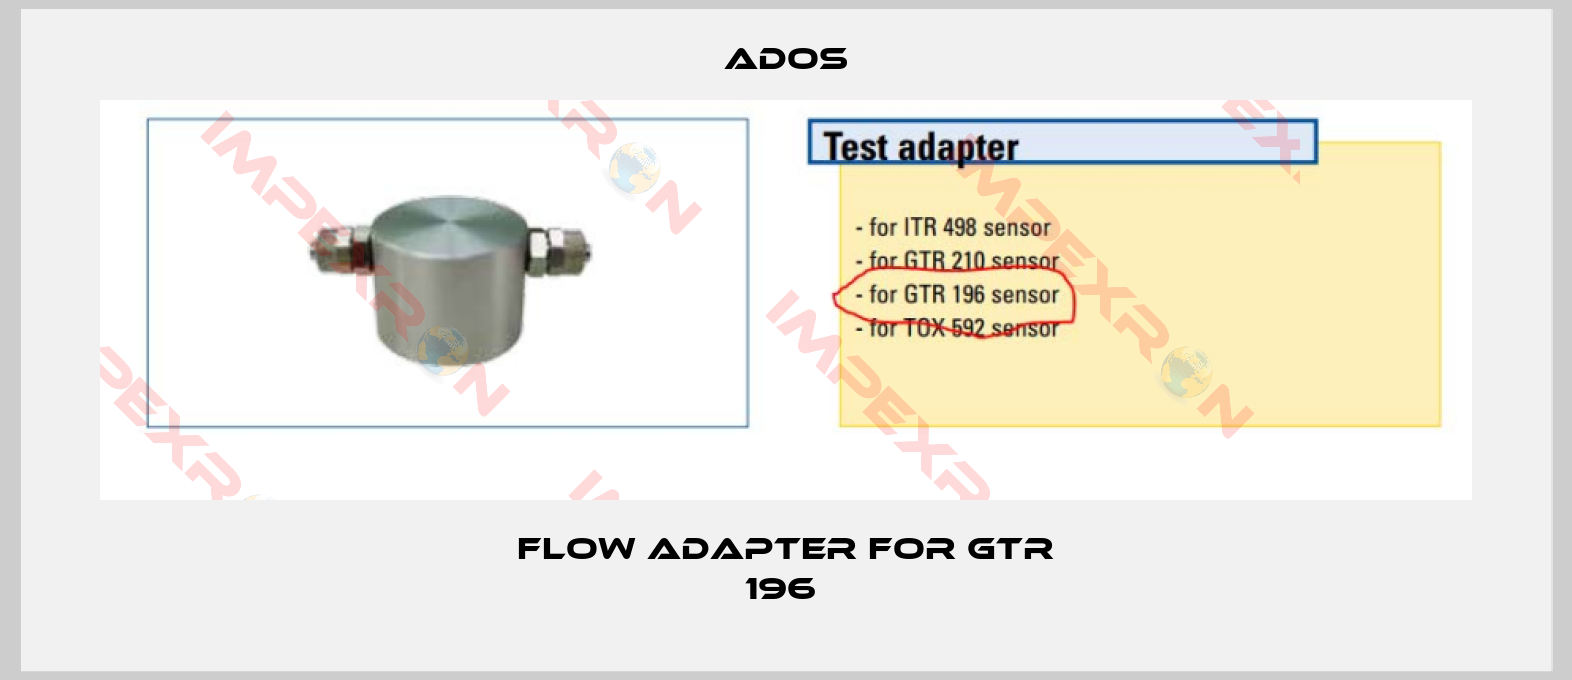 Ados-Flow adapter for GTR 196 